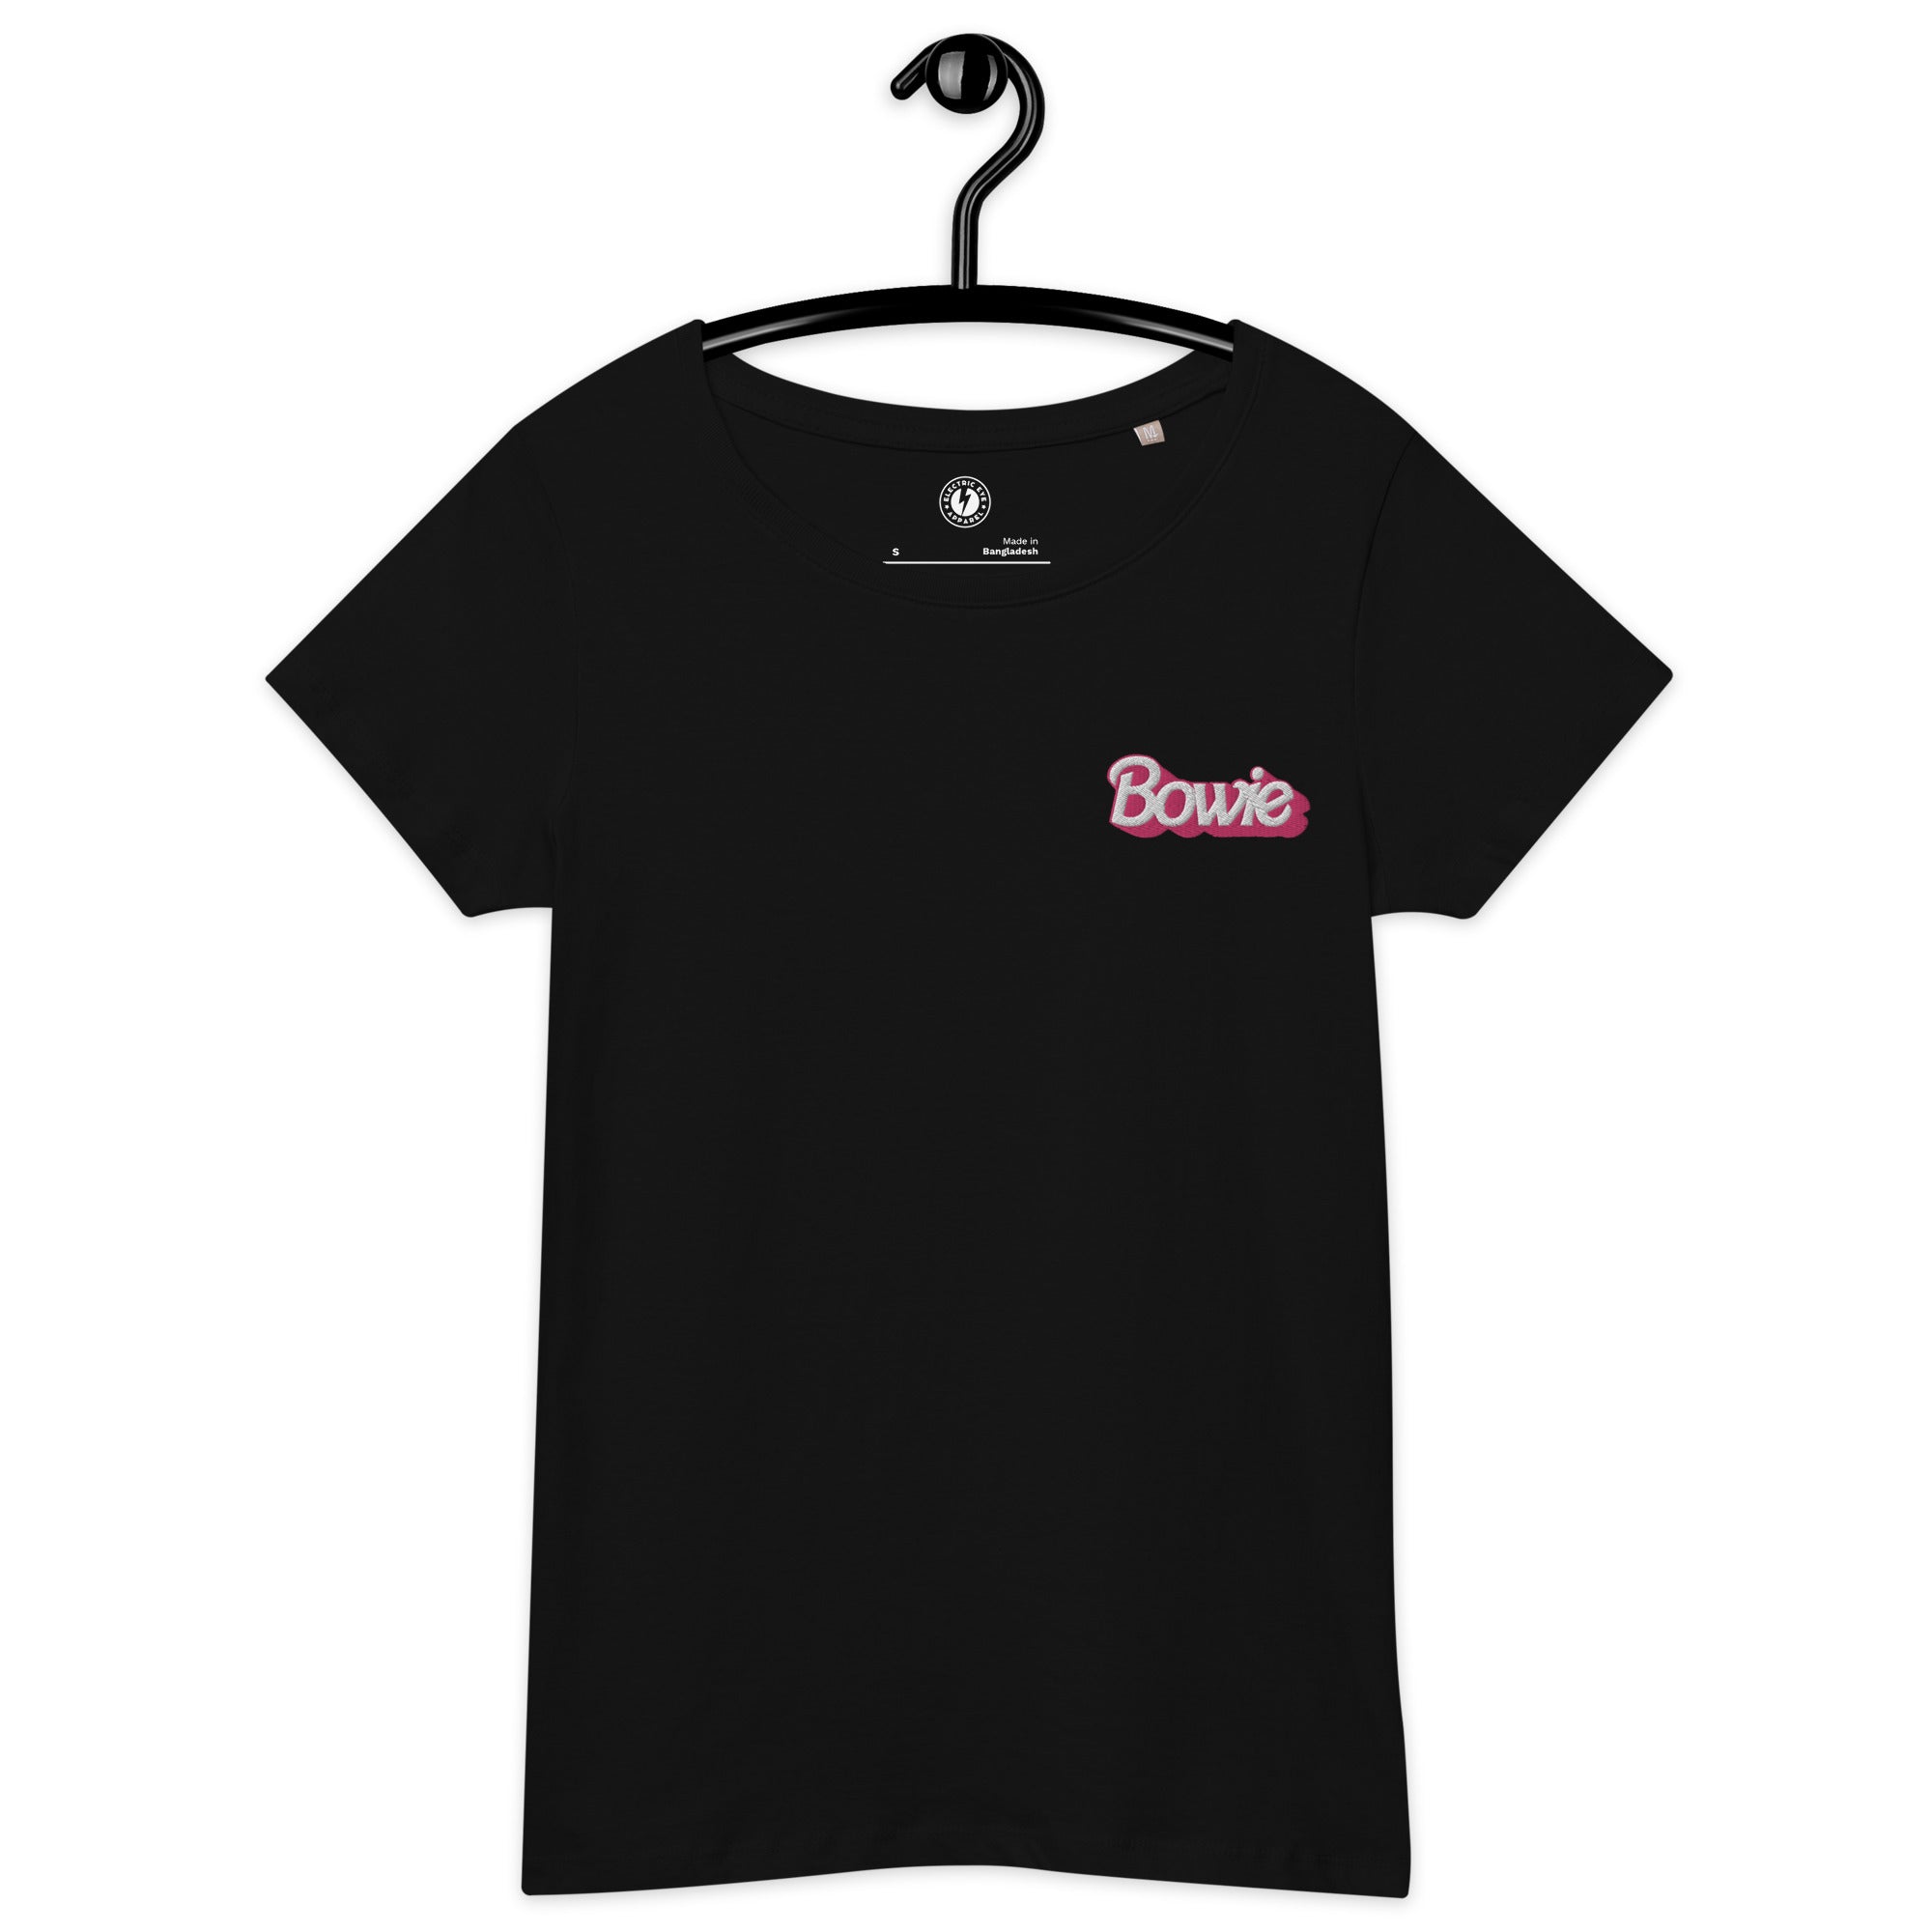 Bowie (famous doll font) Left Chest Embroidered Women’s Fitted organic t-shirt